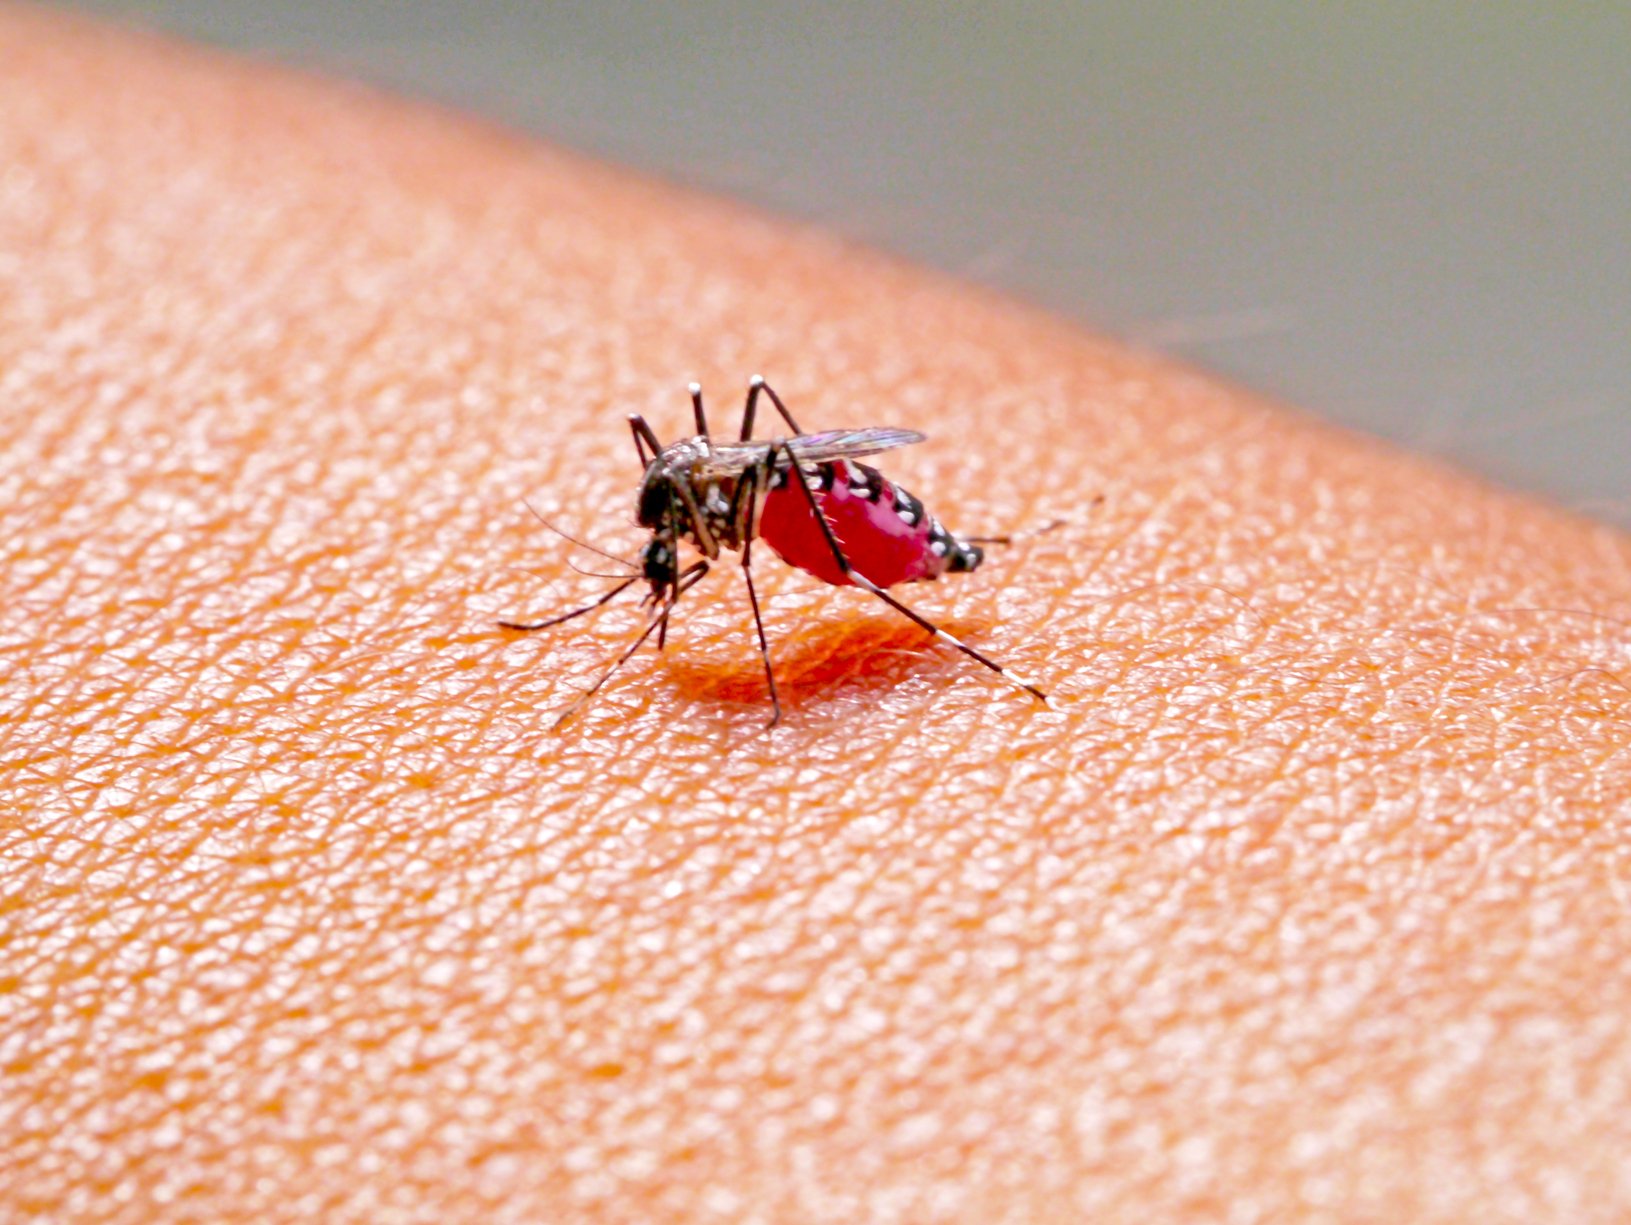 mosquito on arm filling with blood